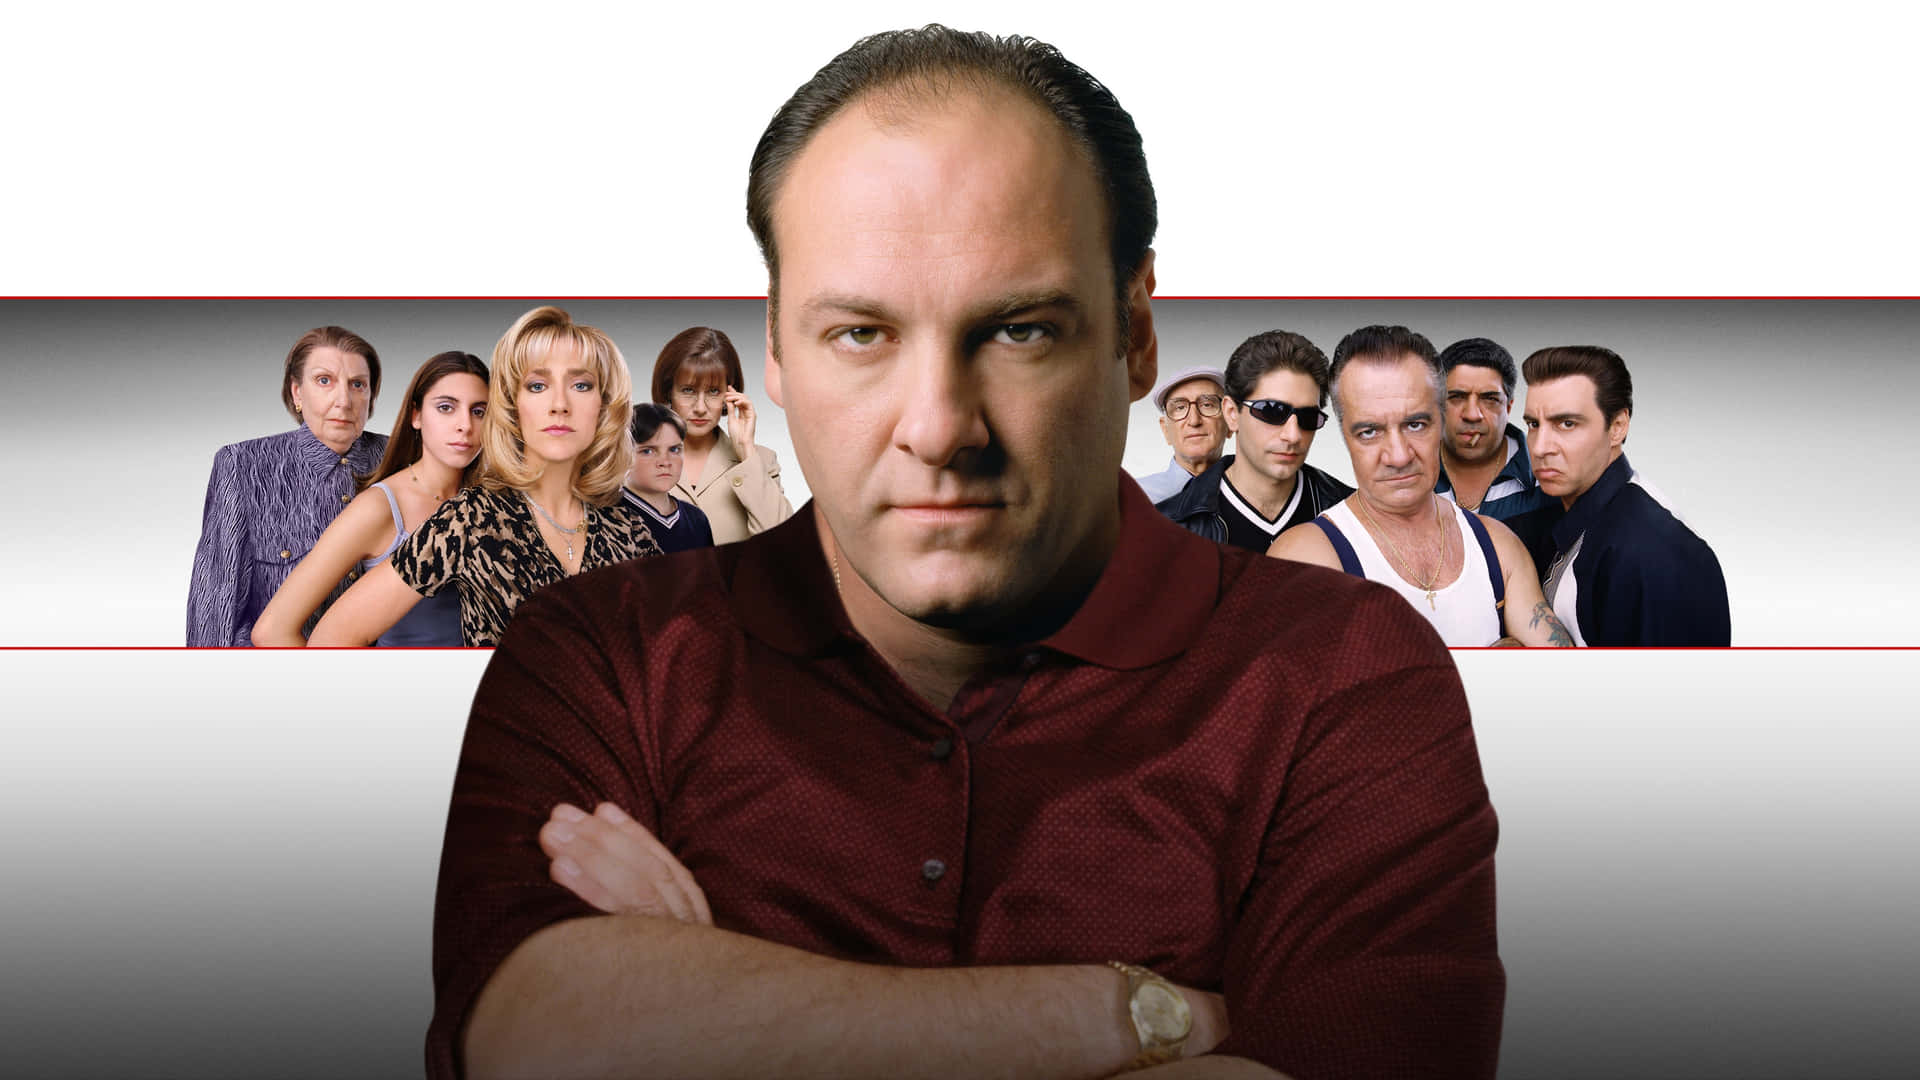 Live life to the fullest with The Sopranos Wallpaper